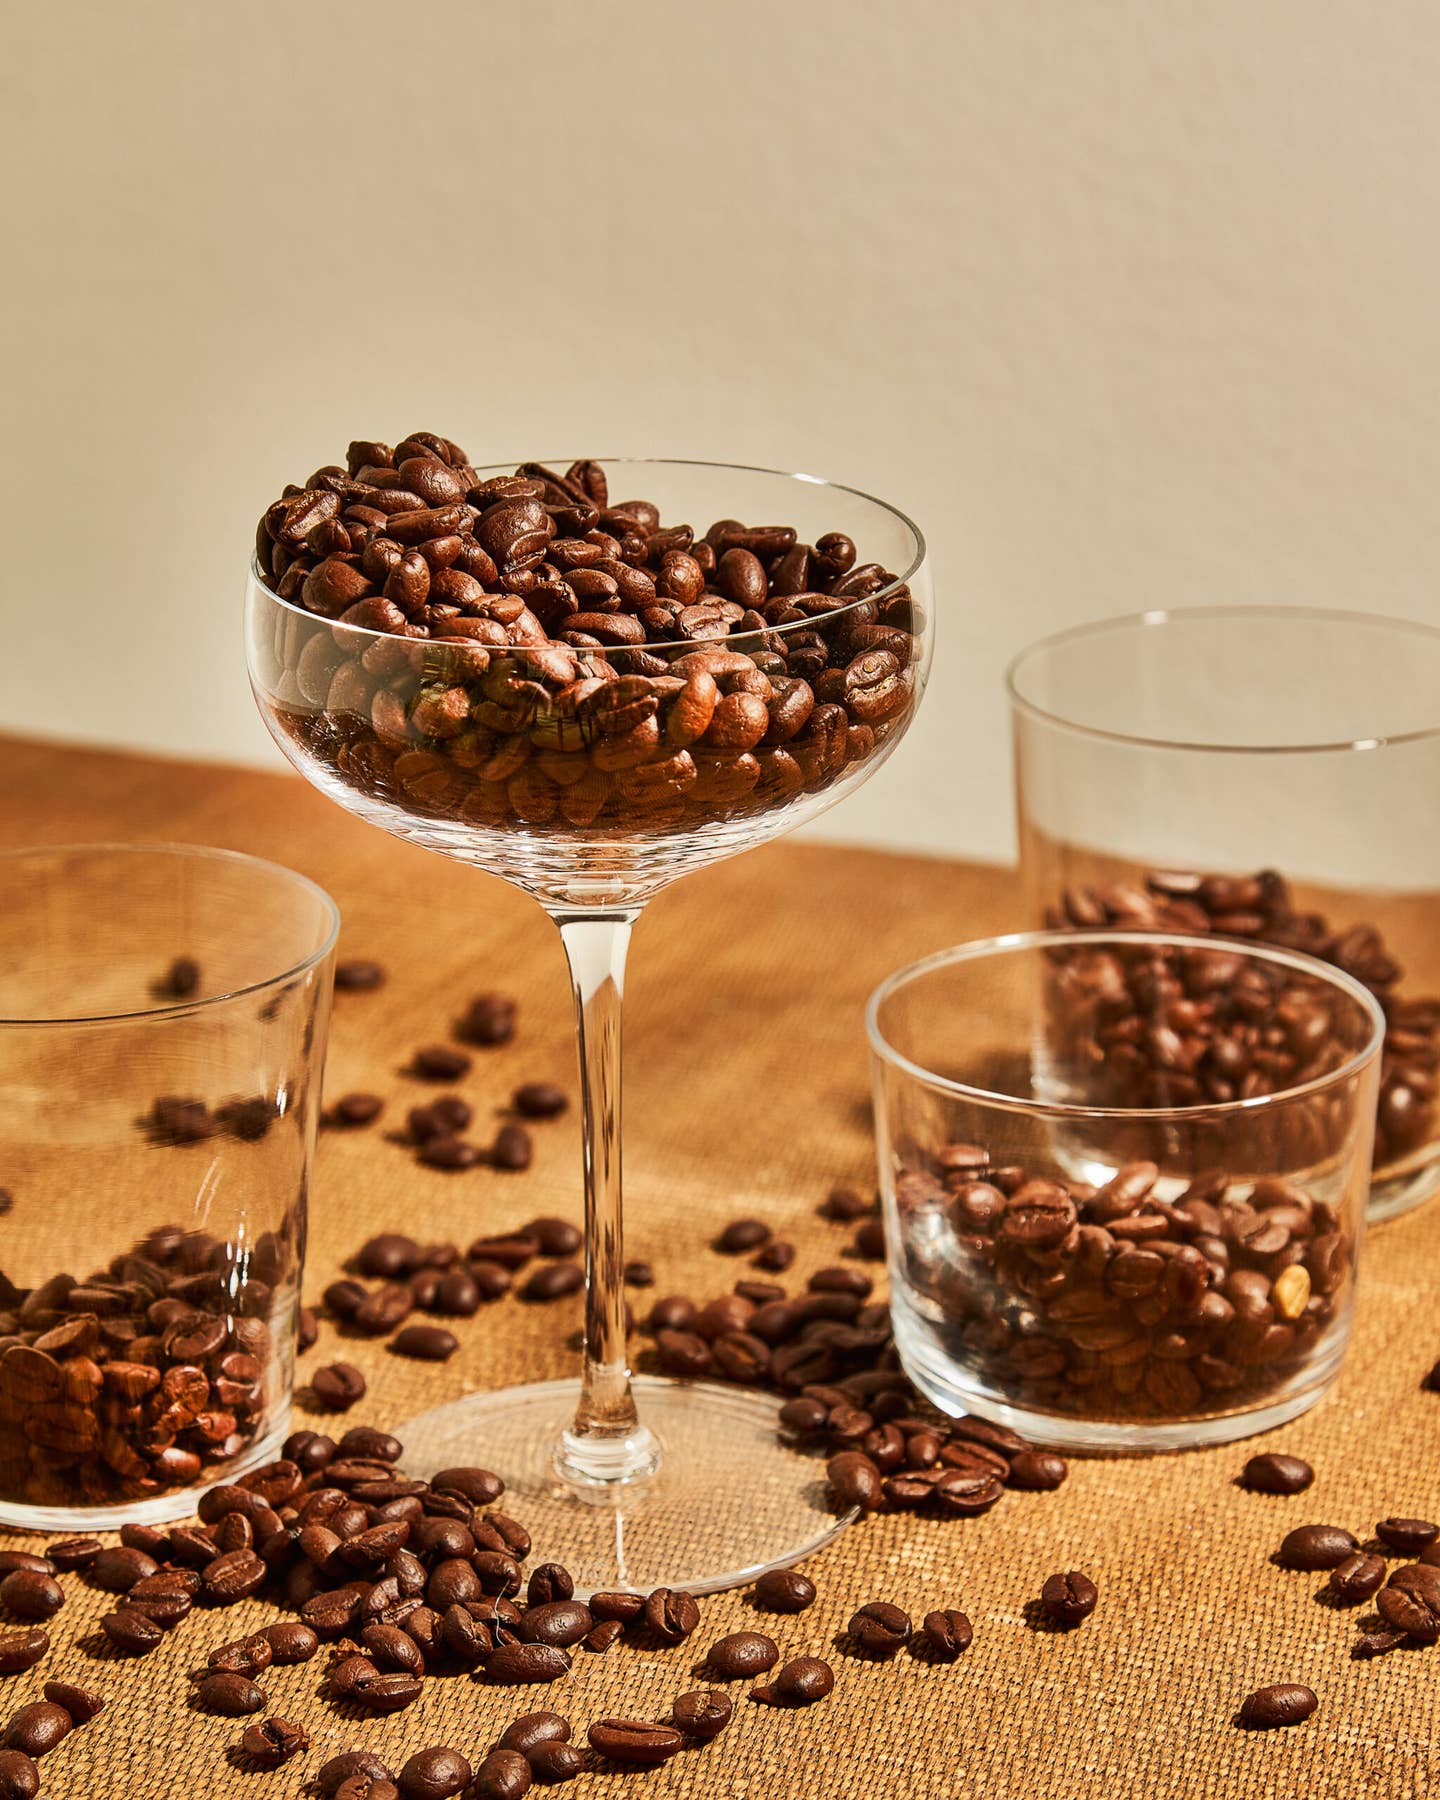 How to Add Coffee to Your Cocktails